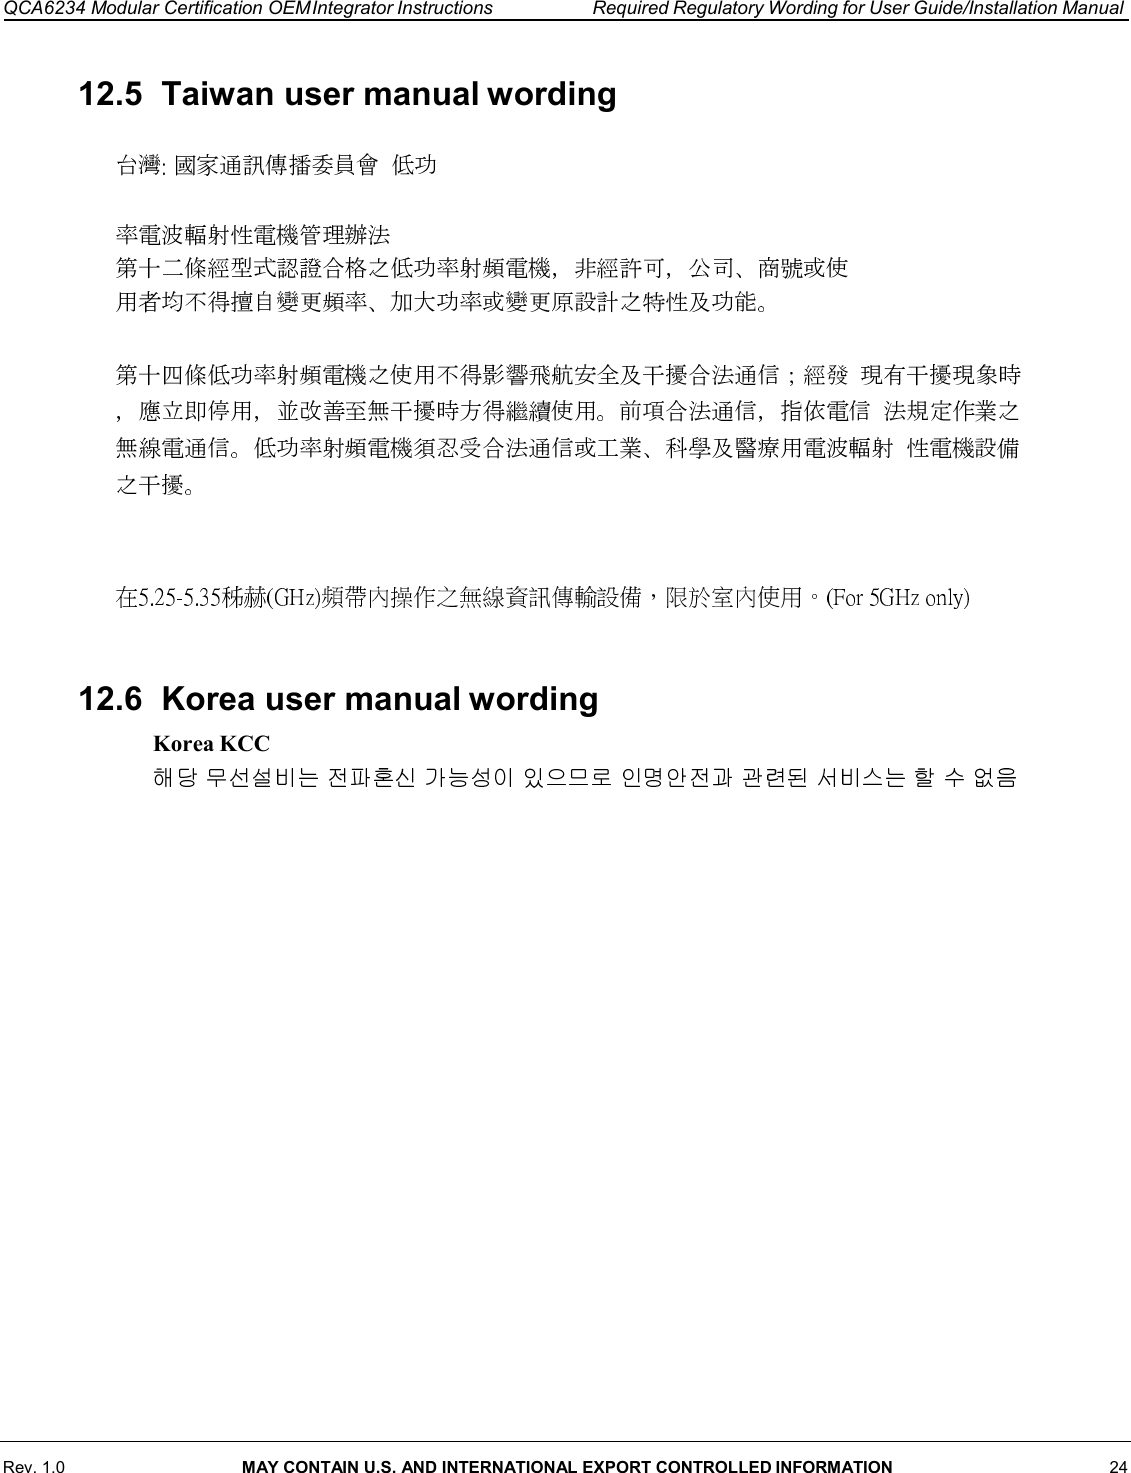 Rev. 1.0  MAY CONTAIN U.S. AND INTERNATIONAL EXPORT CONTROLLED INFORMATION 24  QCA6234 Modular Certification OEM Integrator Instructions  Required Regulatory Wording for User Guide/Installation Manual    12.5  Taiwan user manual wording   12.6  Korea user manual wording Korea KCC 